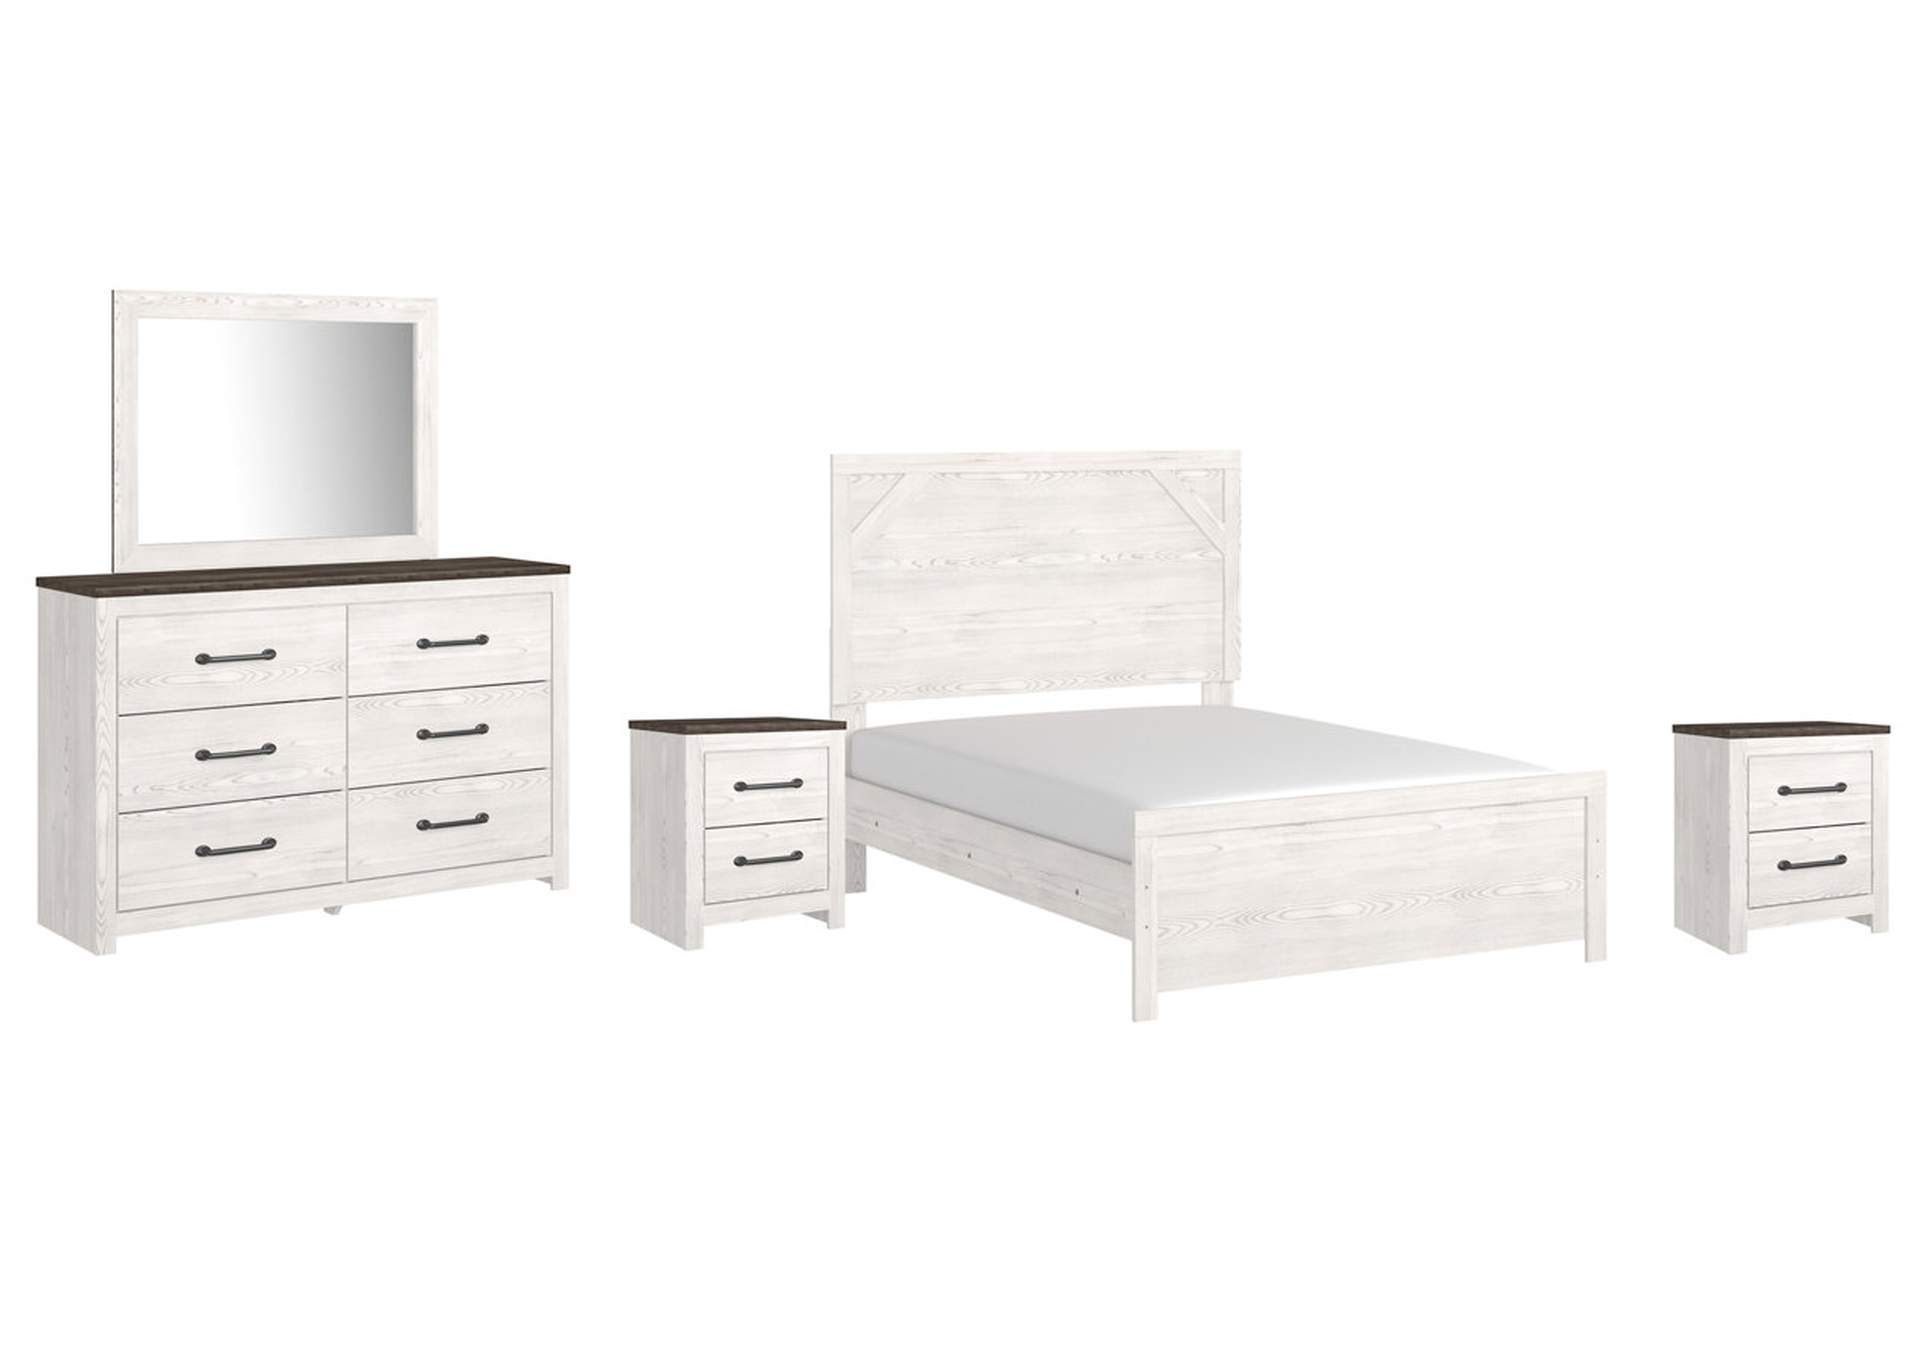 Gerridan Full Panel Bed with Mirrored Dresser and 2 Nightstands,Signature Design By Ashley